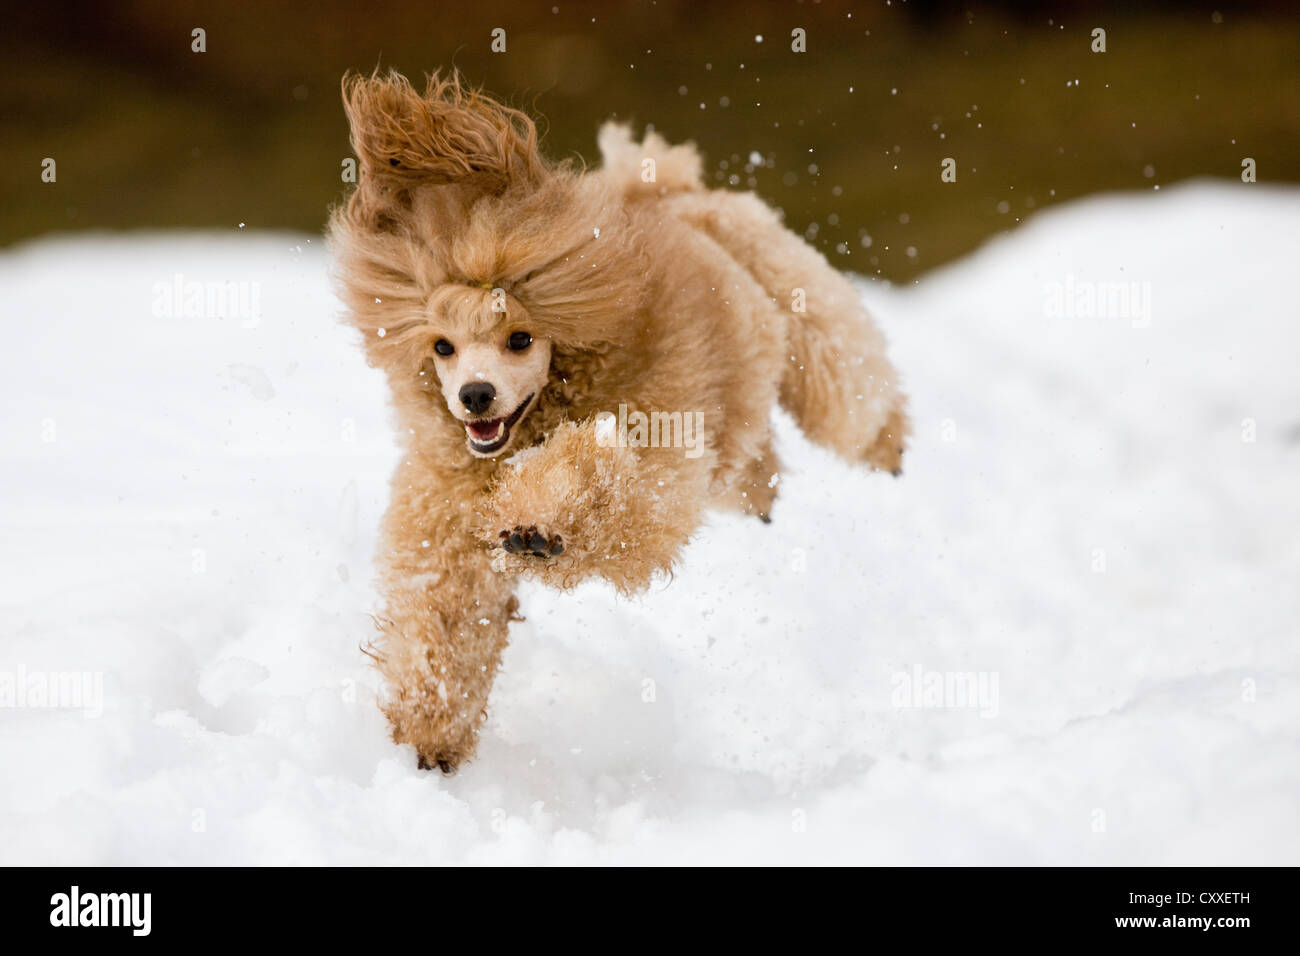 Toy Poodle Running In The Snow North Tyrol Austria Europe Stock Photo Alamy